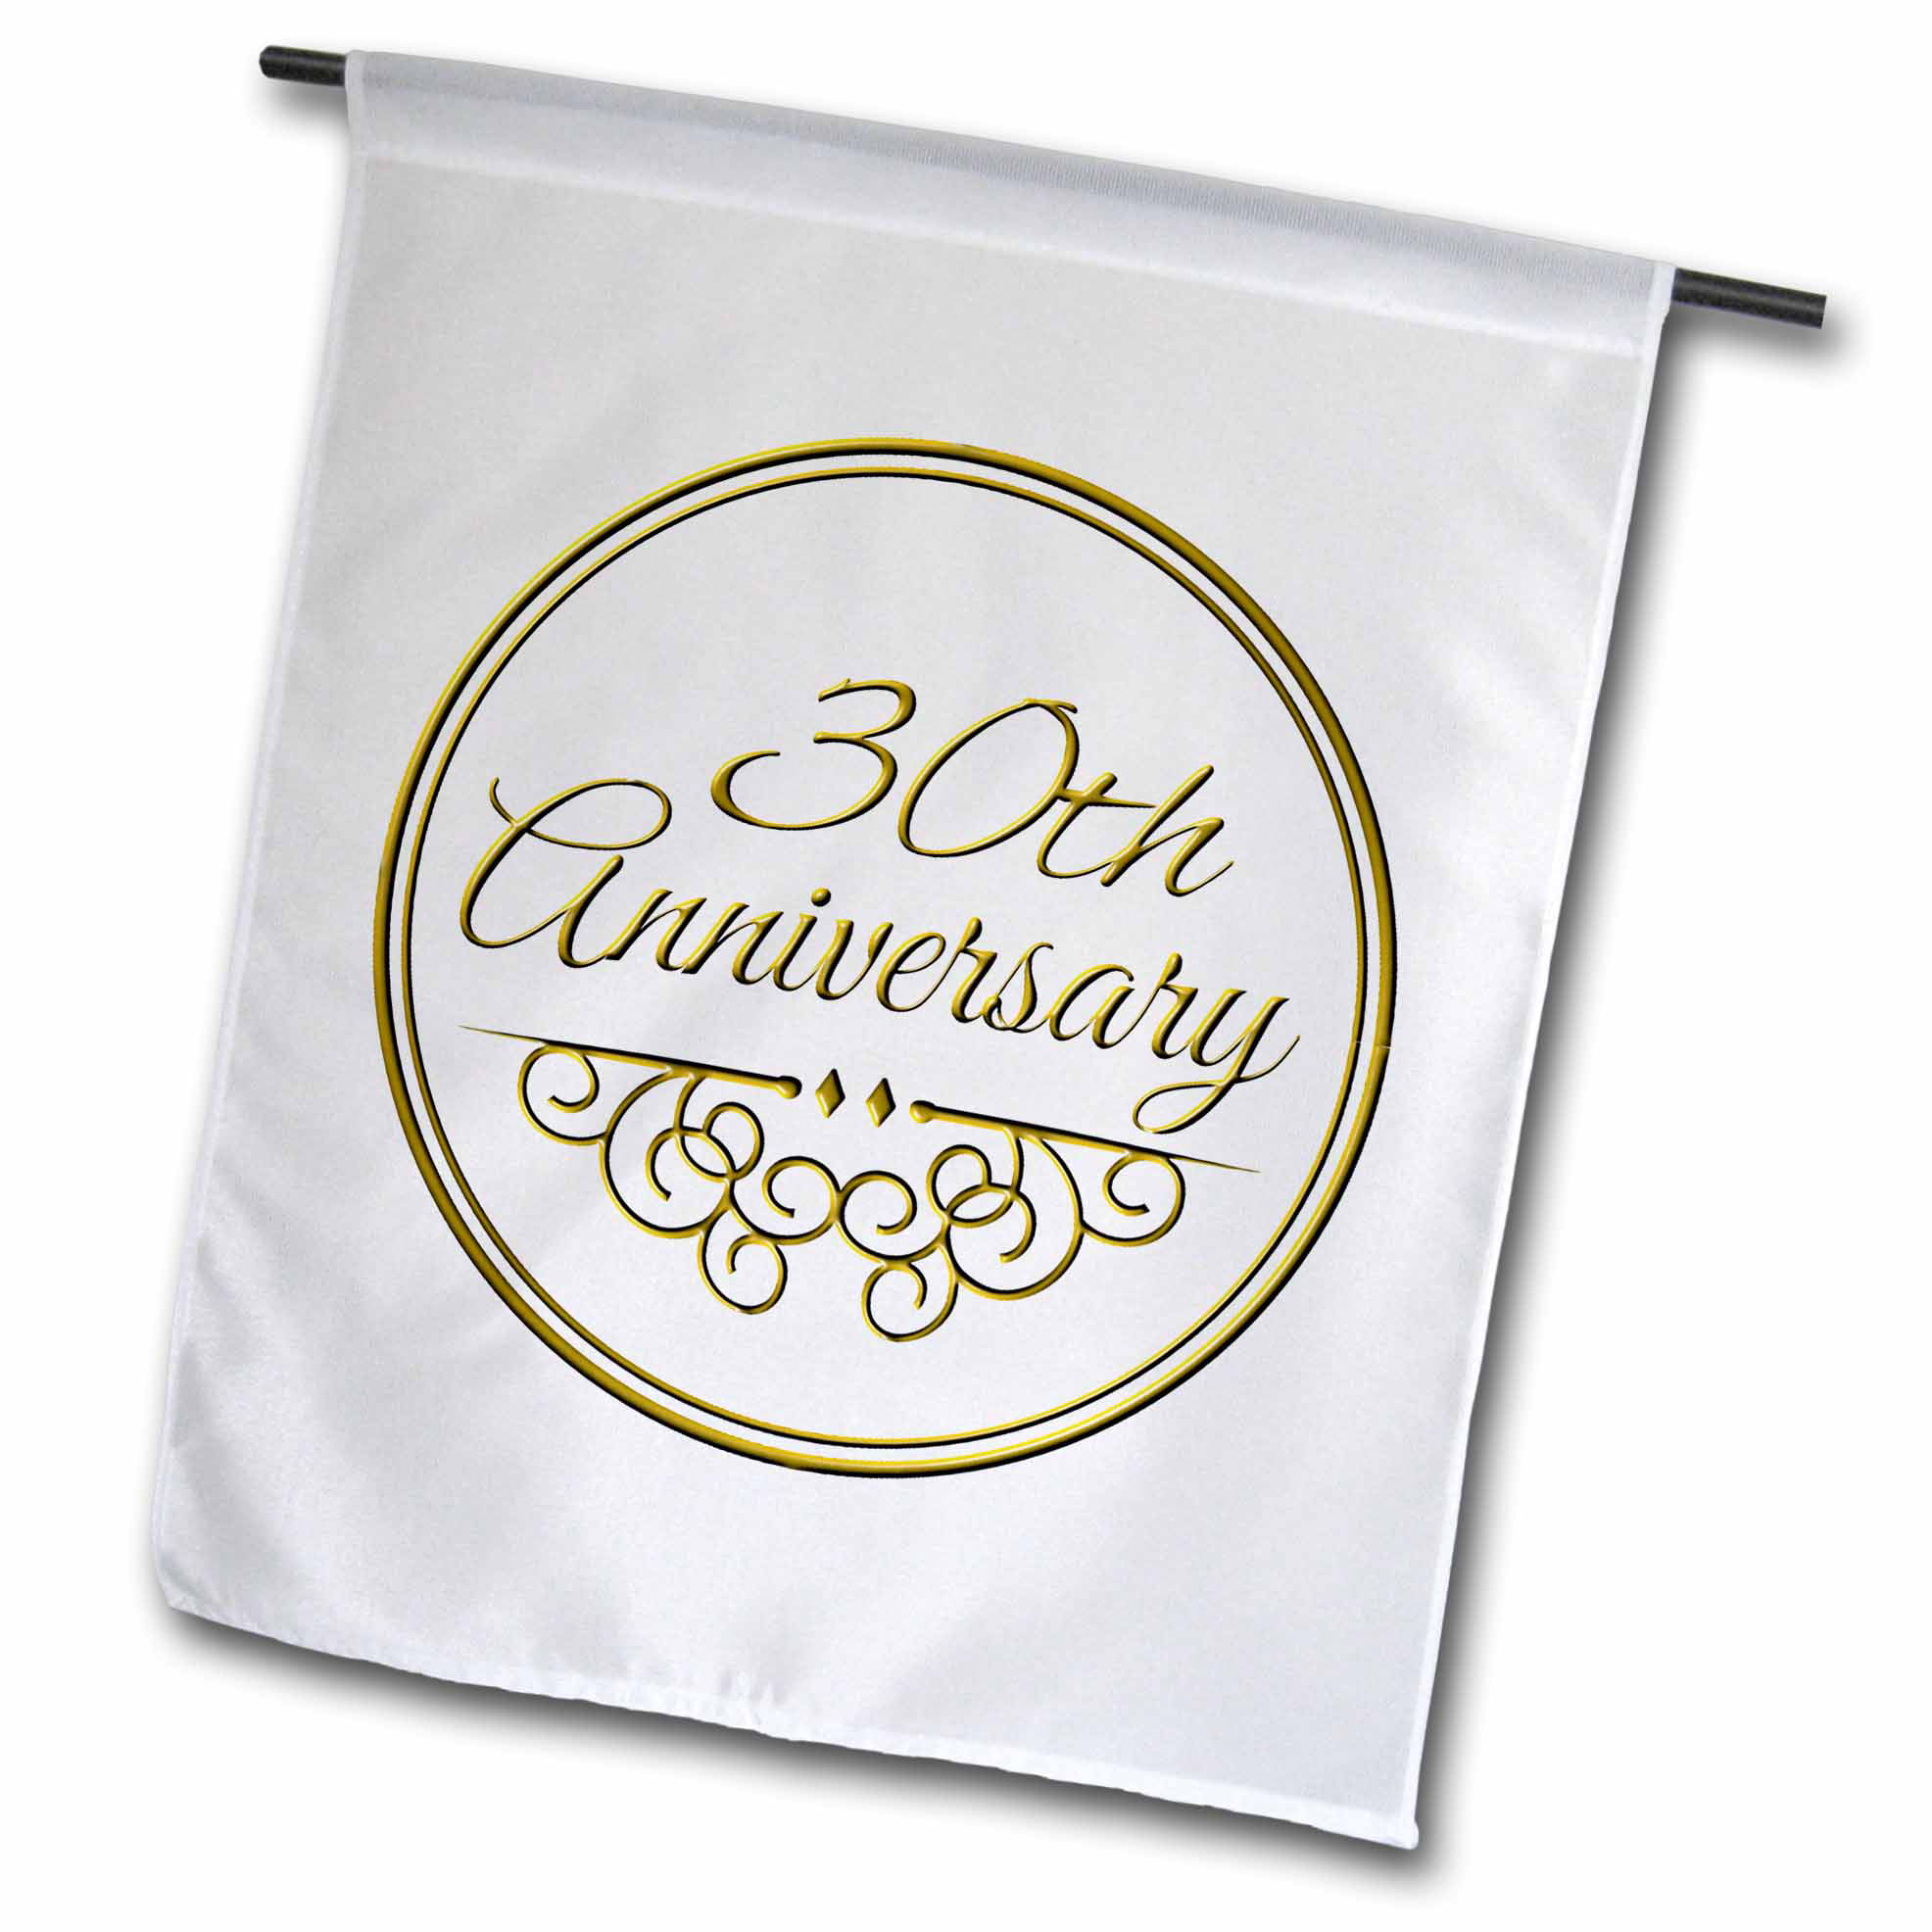 30 Years Wedding Anniversary Gifts
 3dRose 30th Anniversary t gold text for celebrating